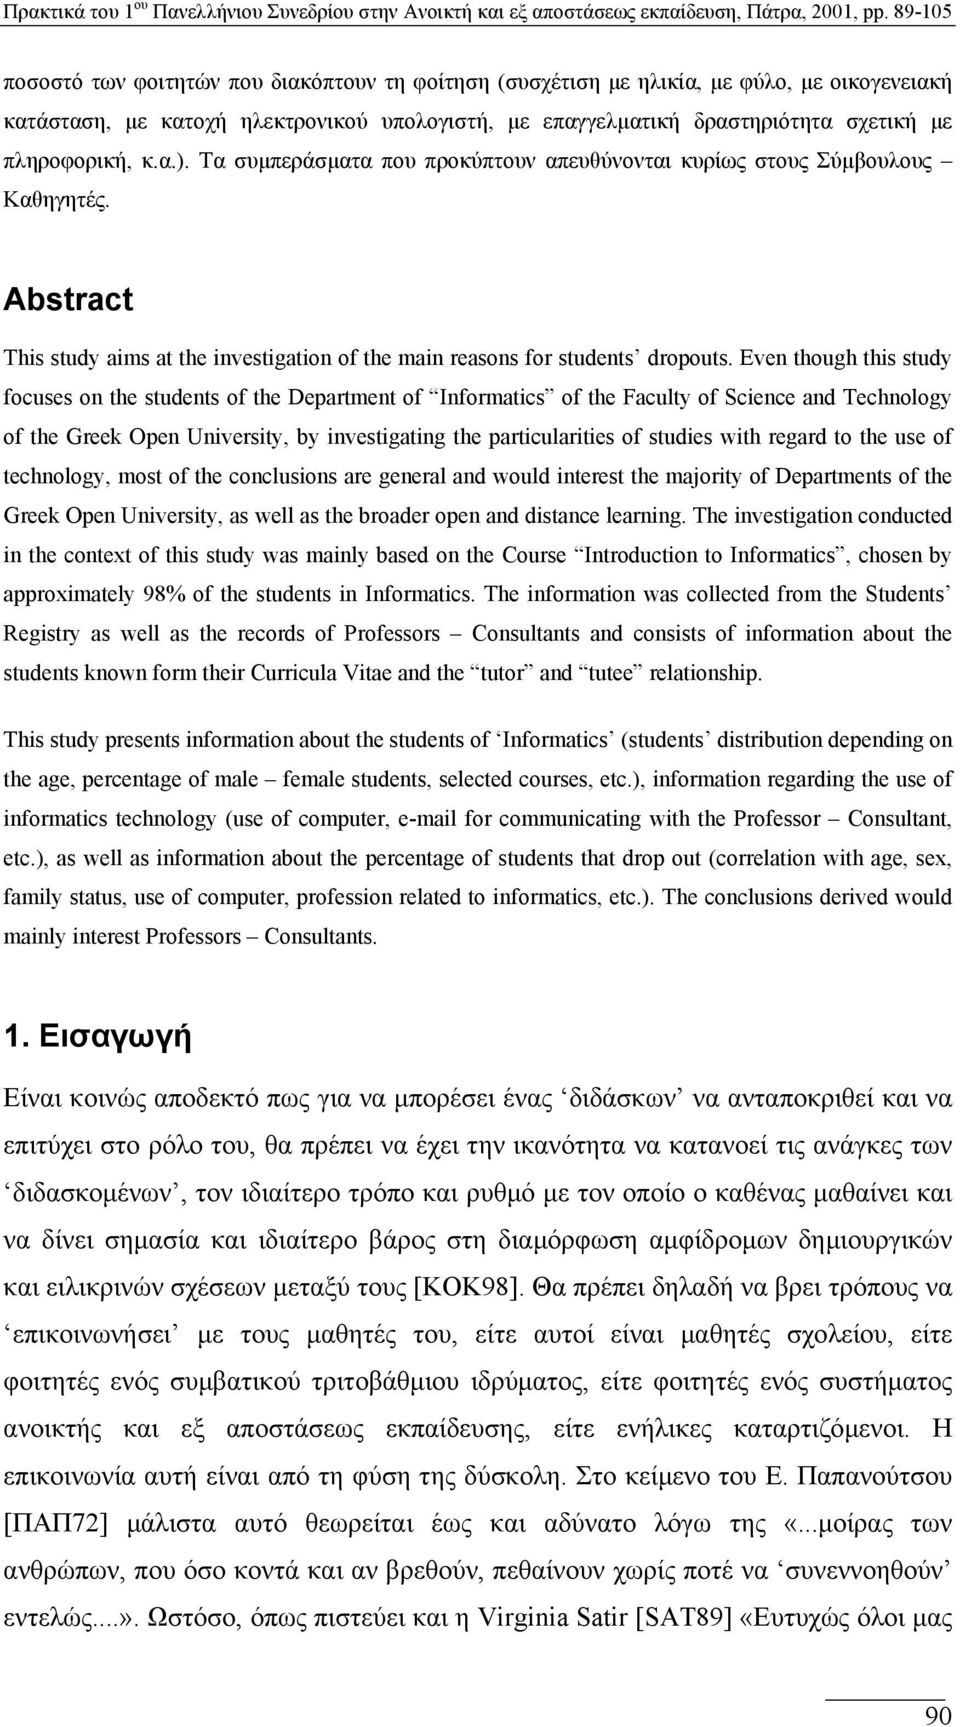 Even though this study focuses on the students of the Department of Informatics of the Faculty of Science and Technology of the Greek Open University, by investigating the particularities of studies